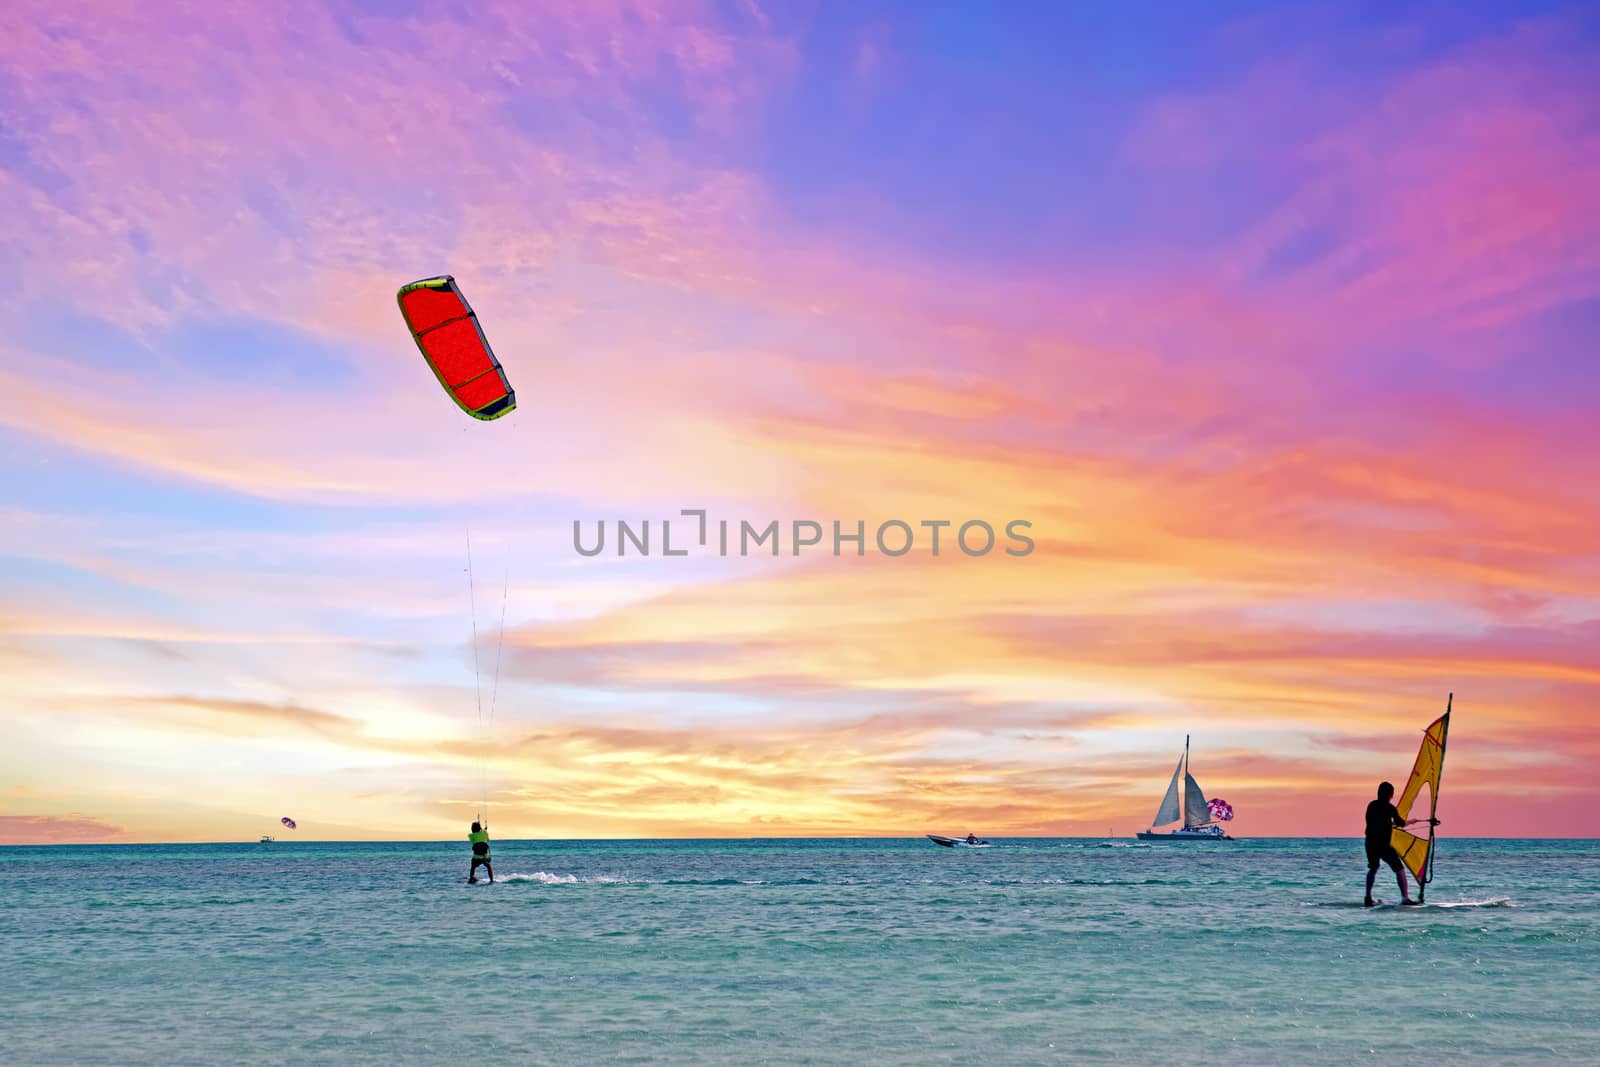 Watersports at Palm Beach on Aruba island in the Caribbean Sea at sunset